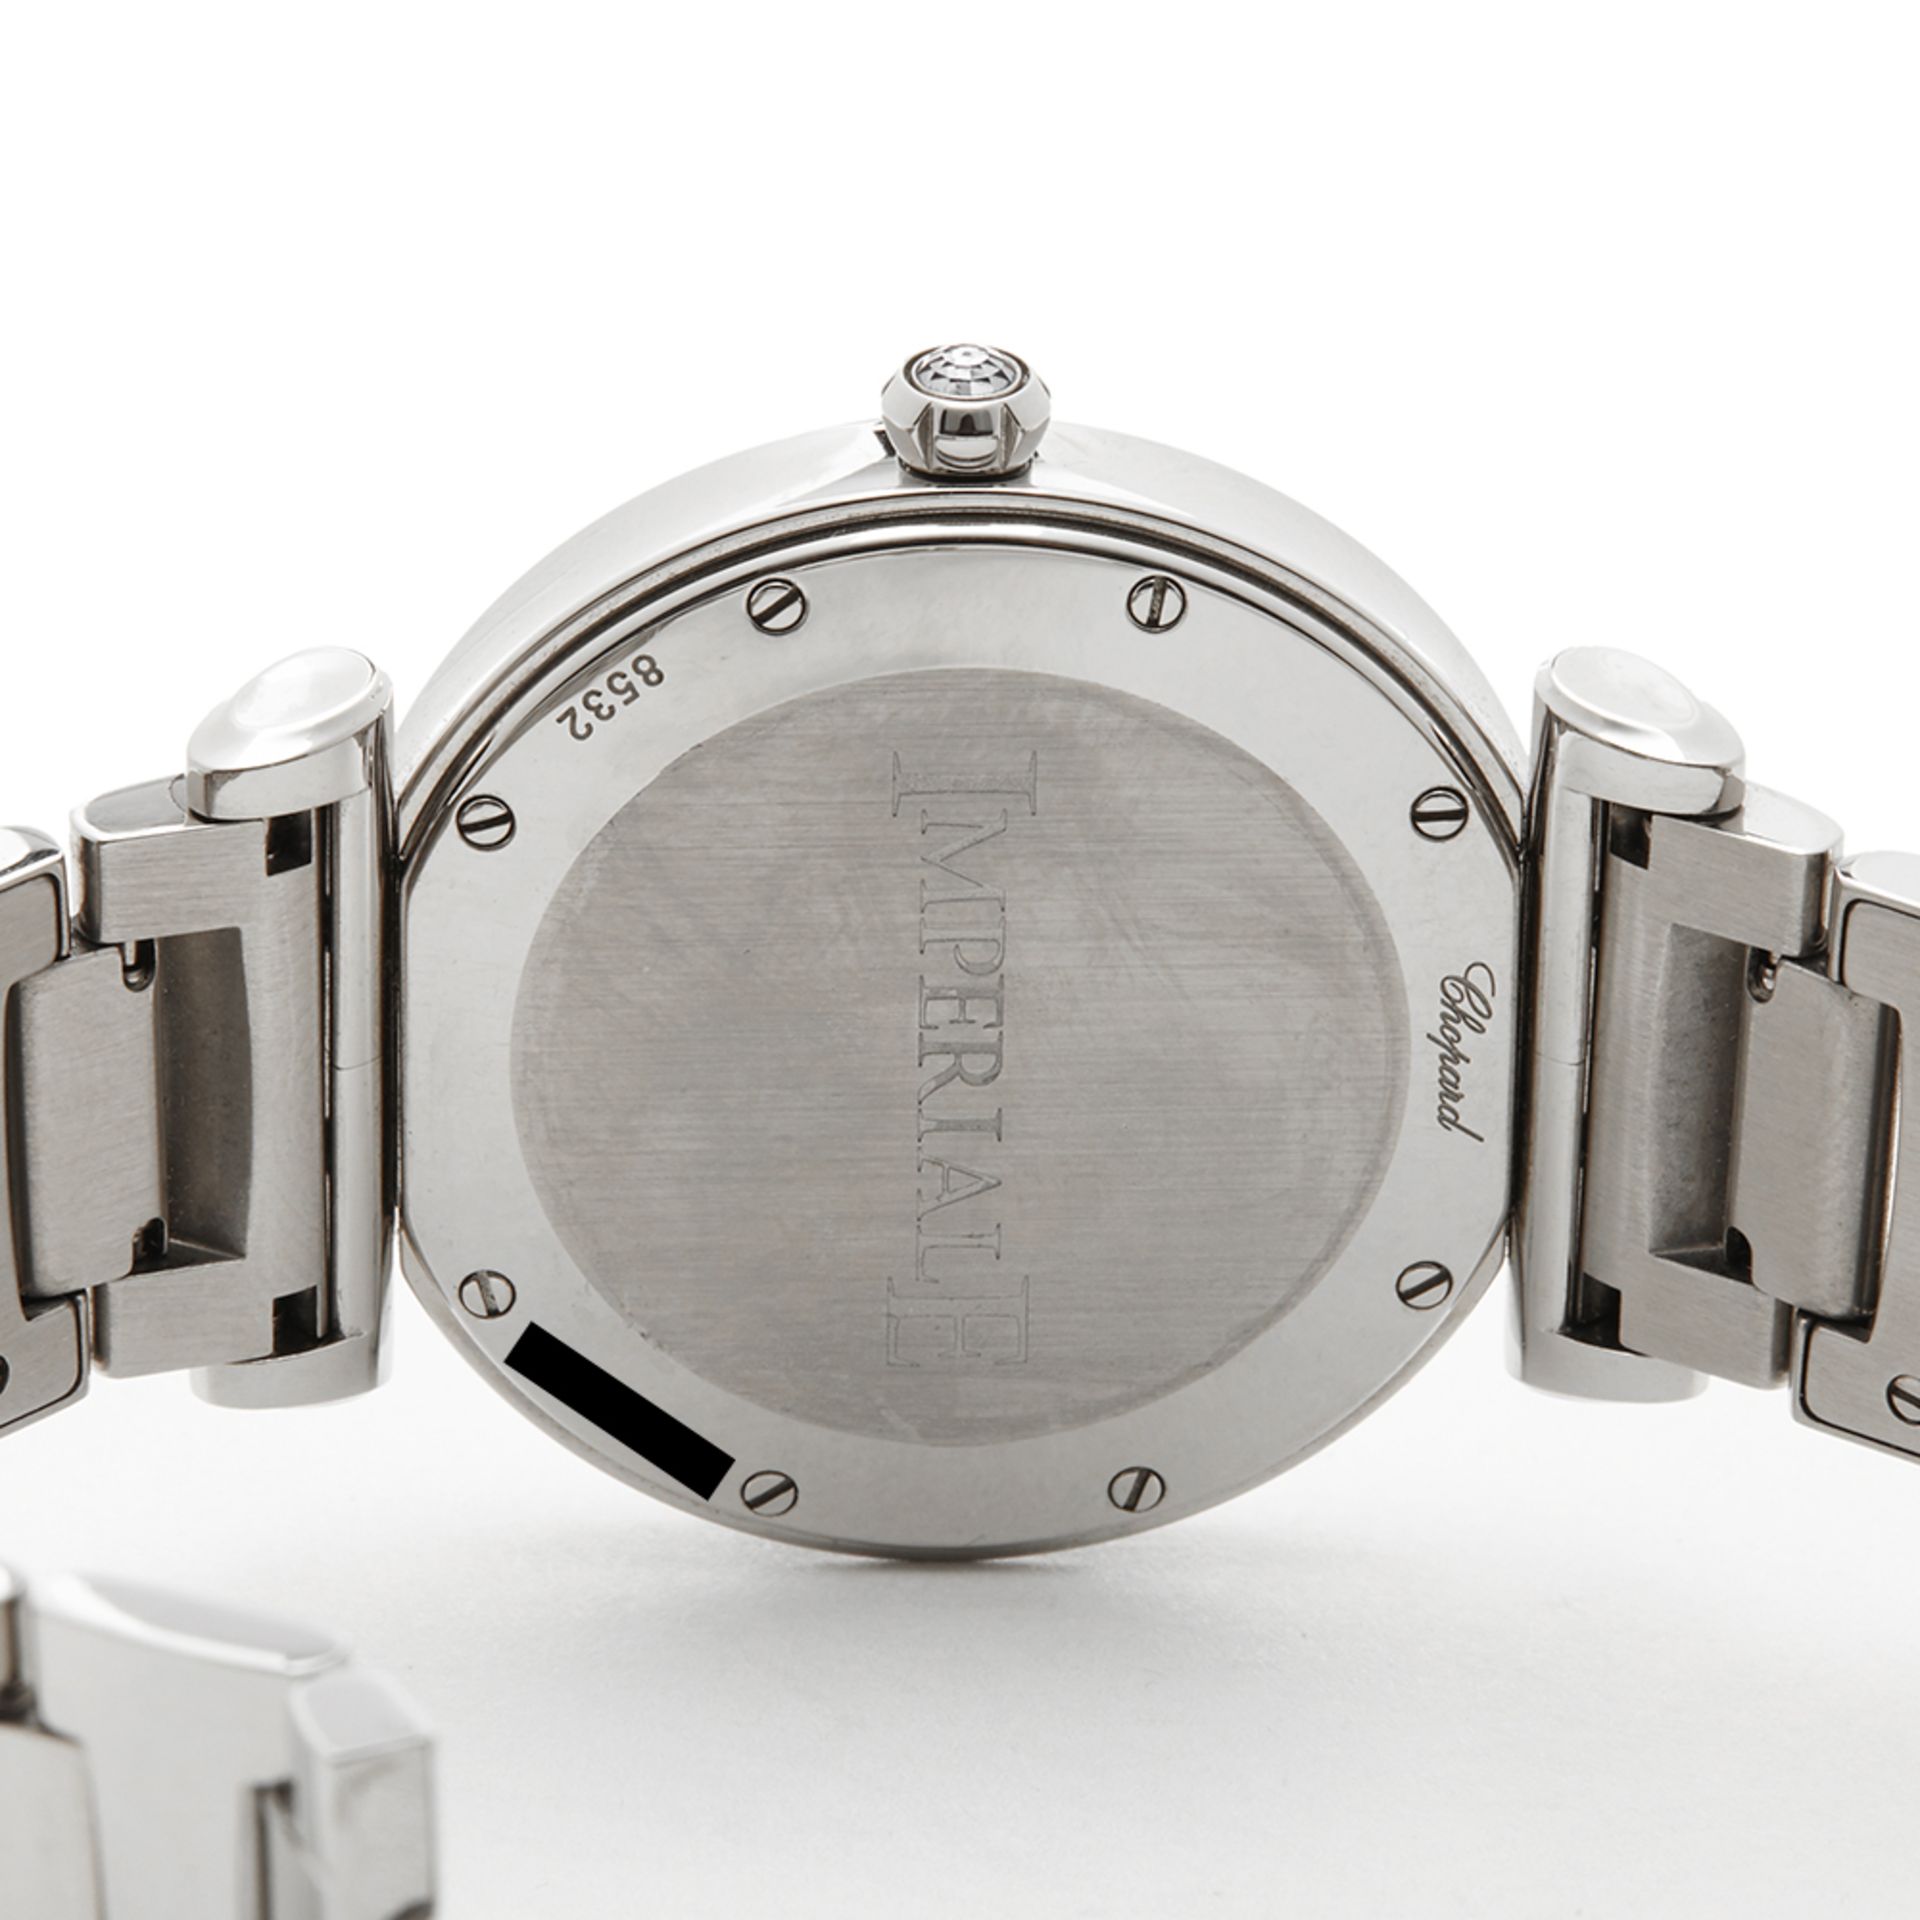 Chopard Imperiale Stainless Steel - 388532-3004 - Image 7 of 8